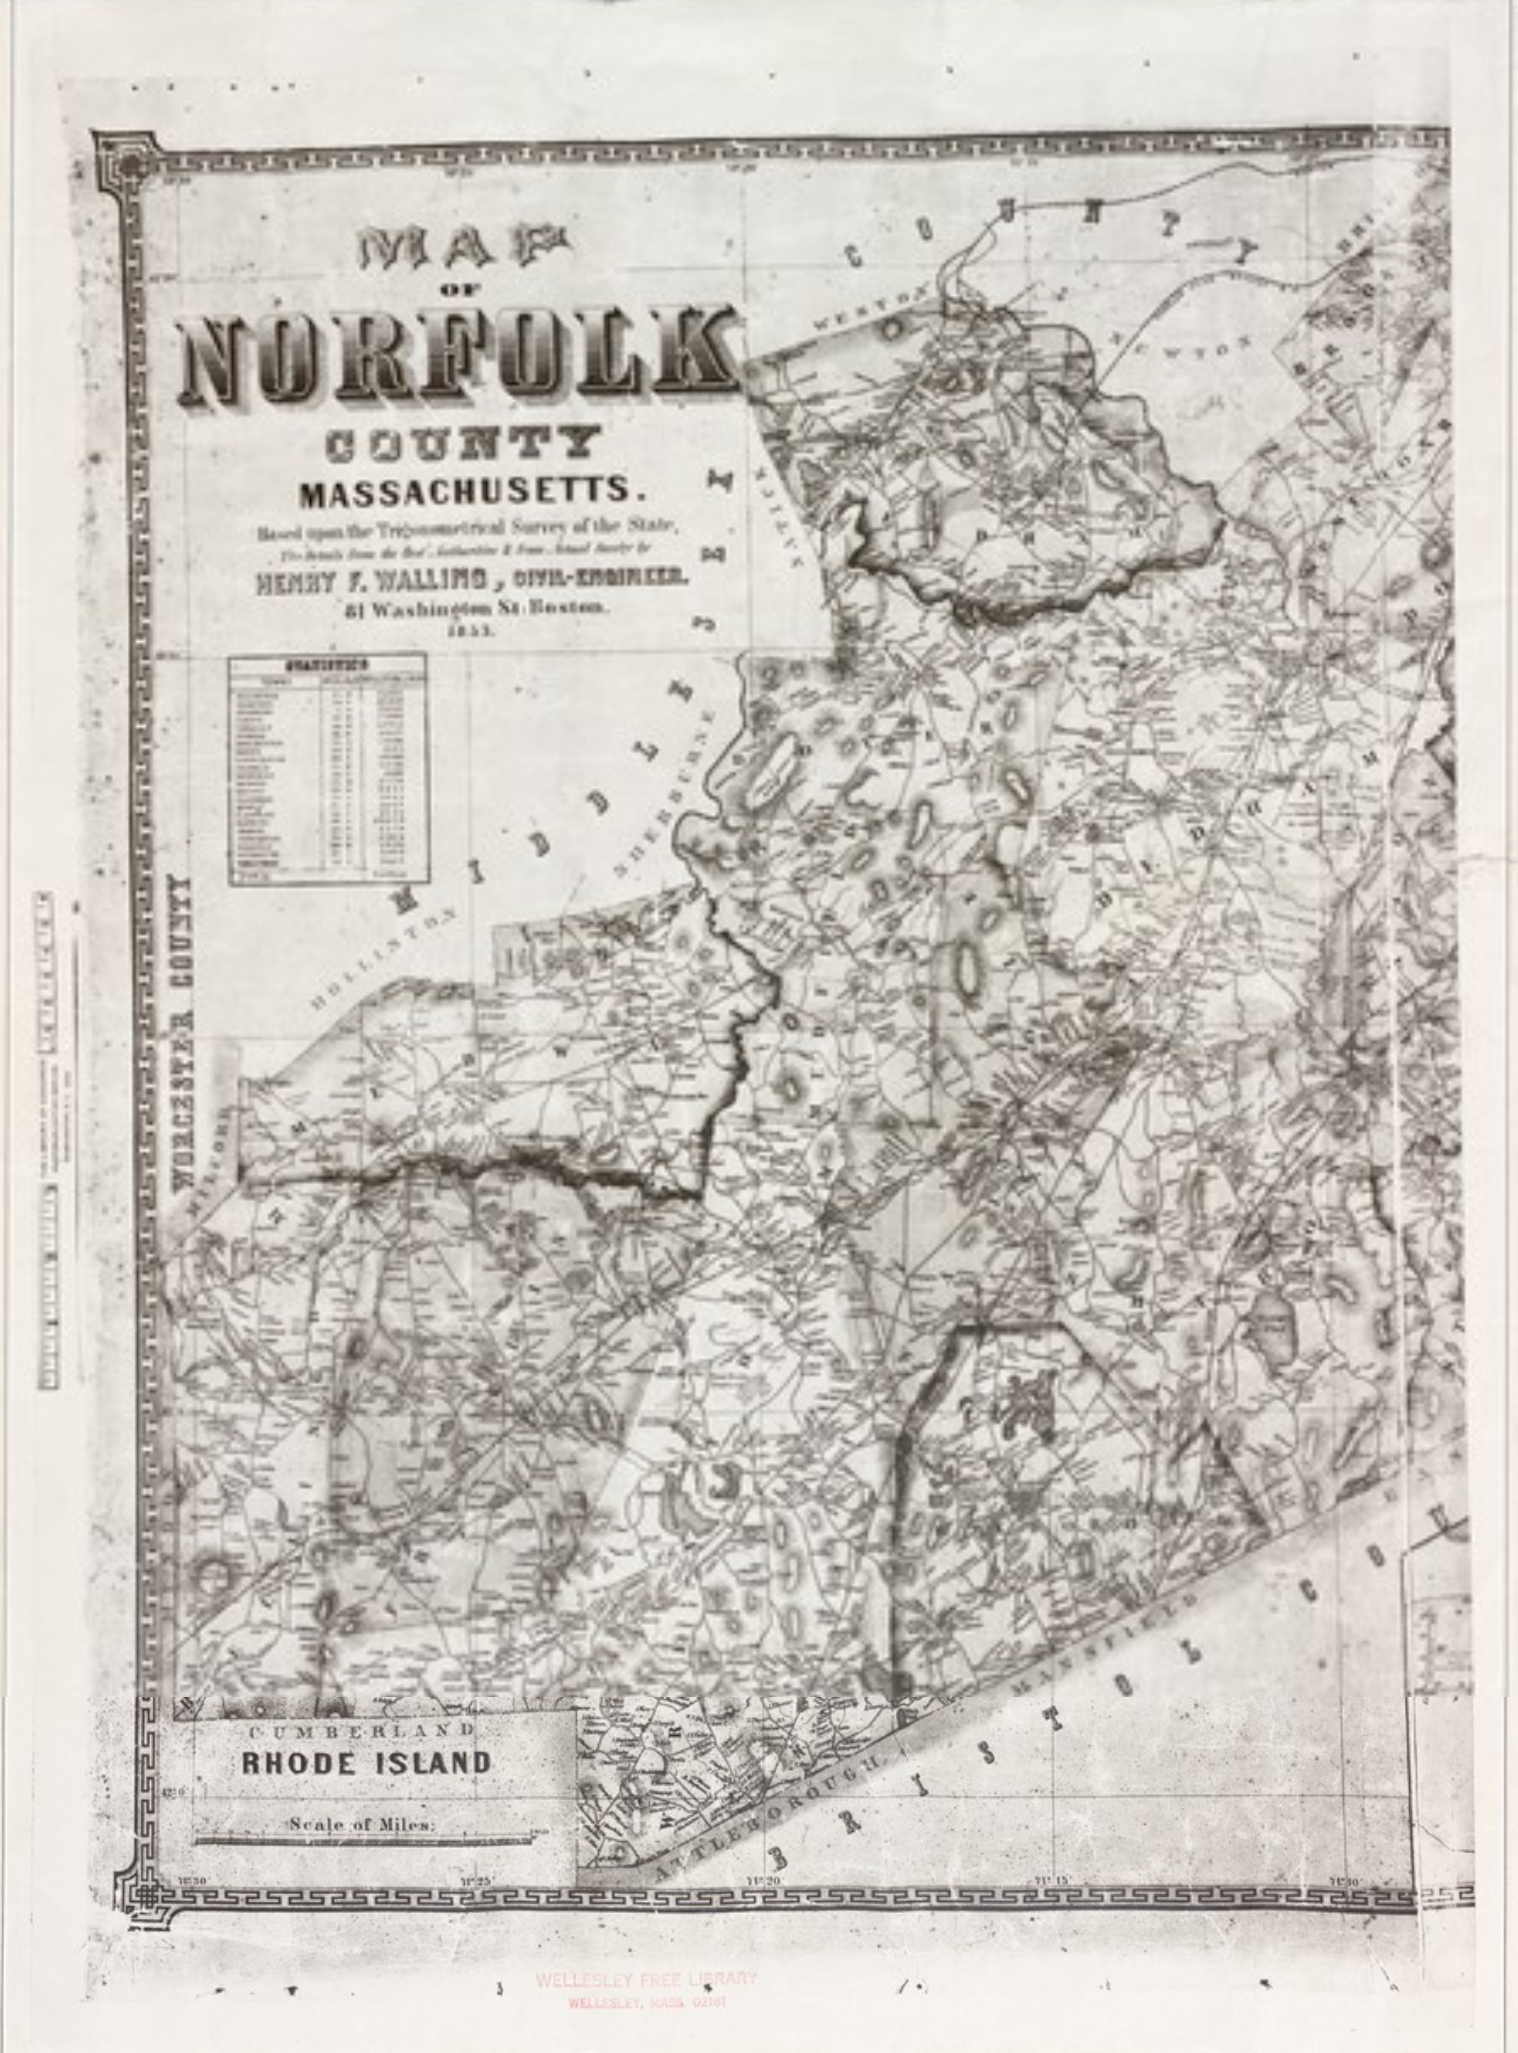 Town of Norfolk, Design Consultant